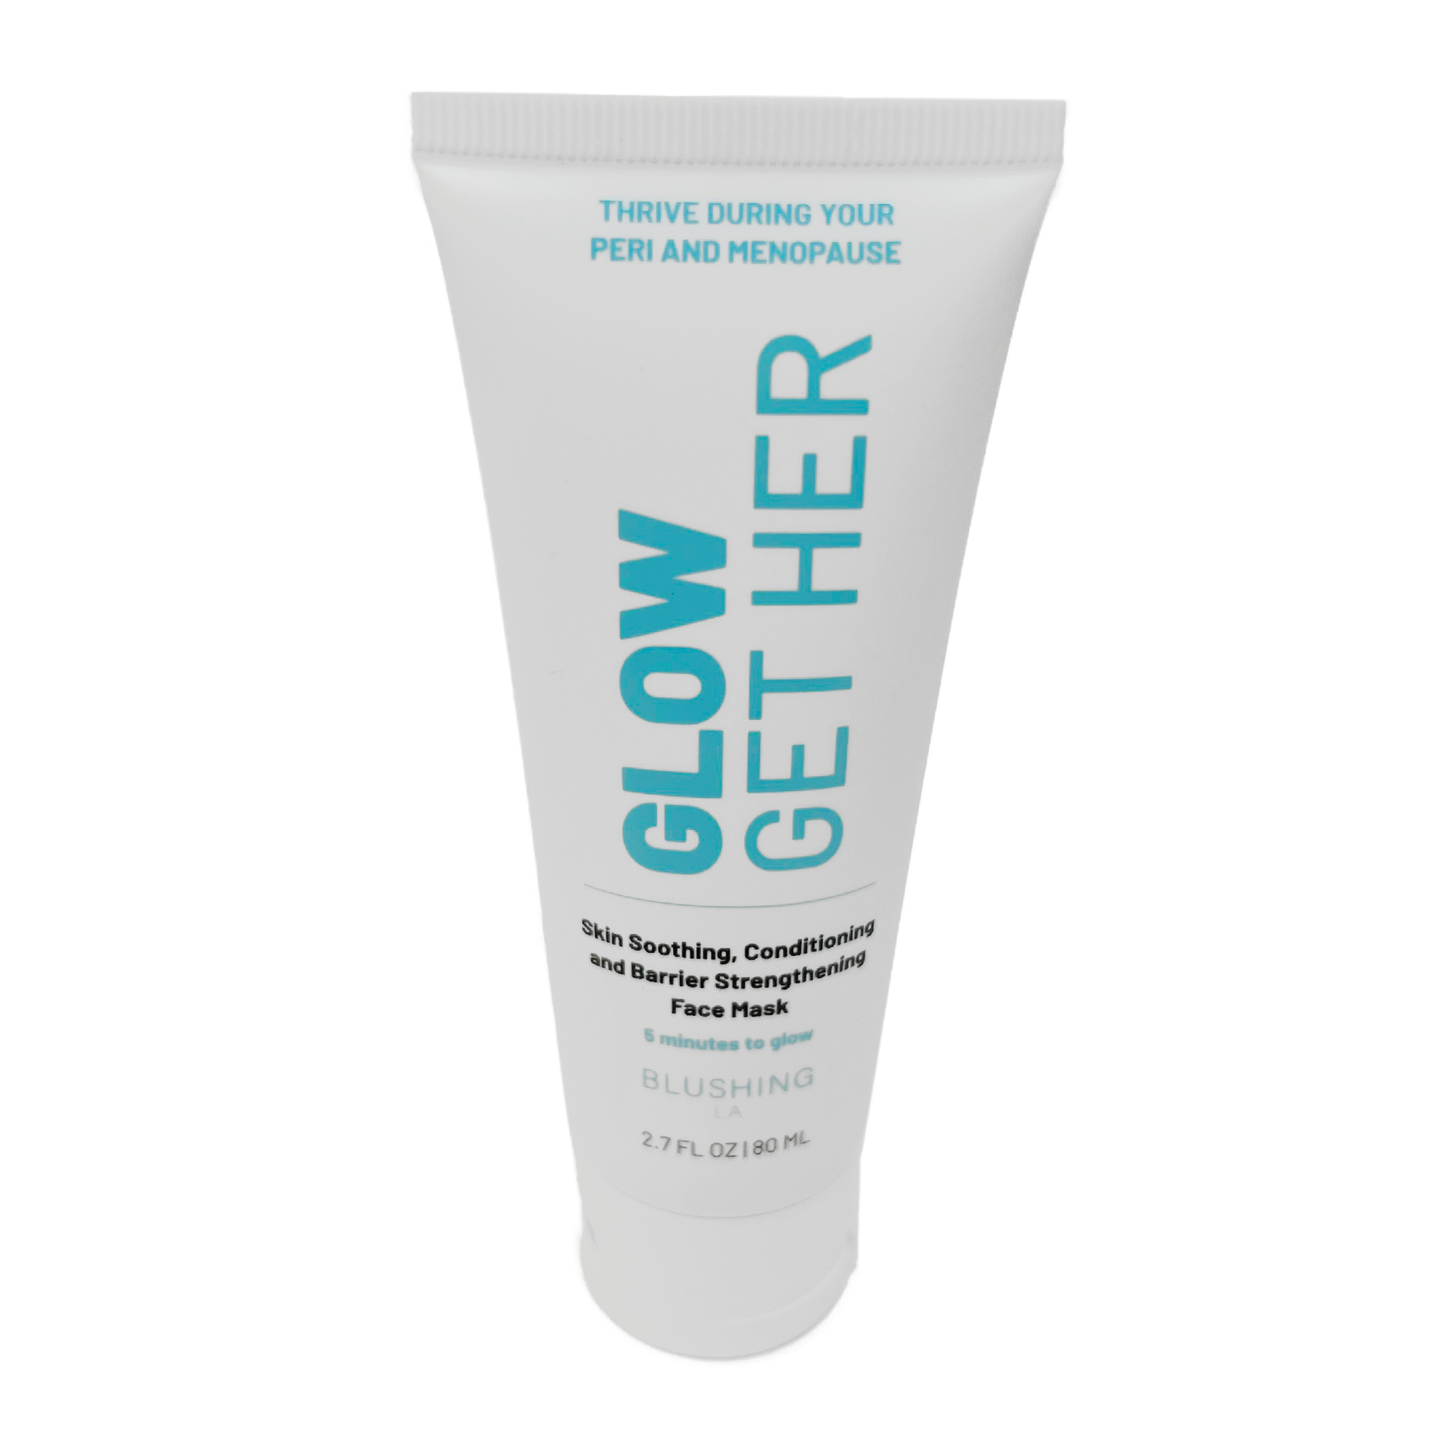 Glow Get Her – Skin Soothing, Conditioning and Barrier Strengthening Face Mask 80ml